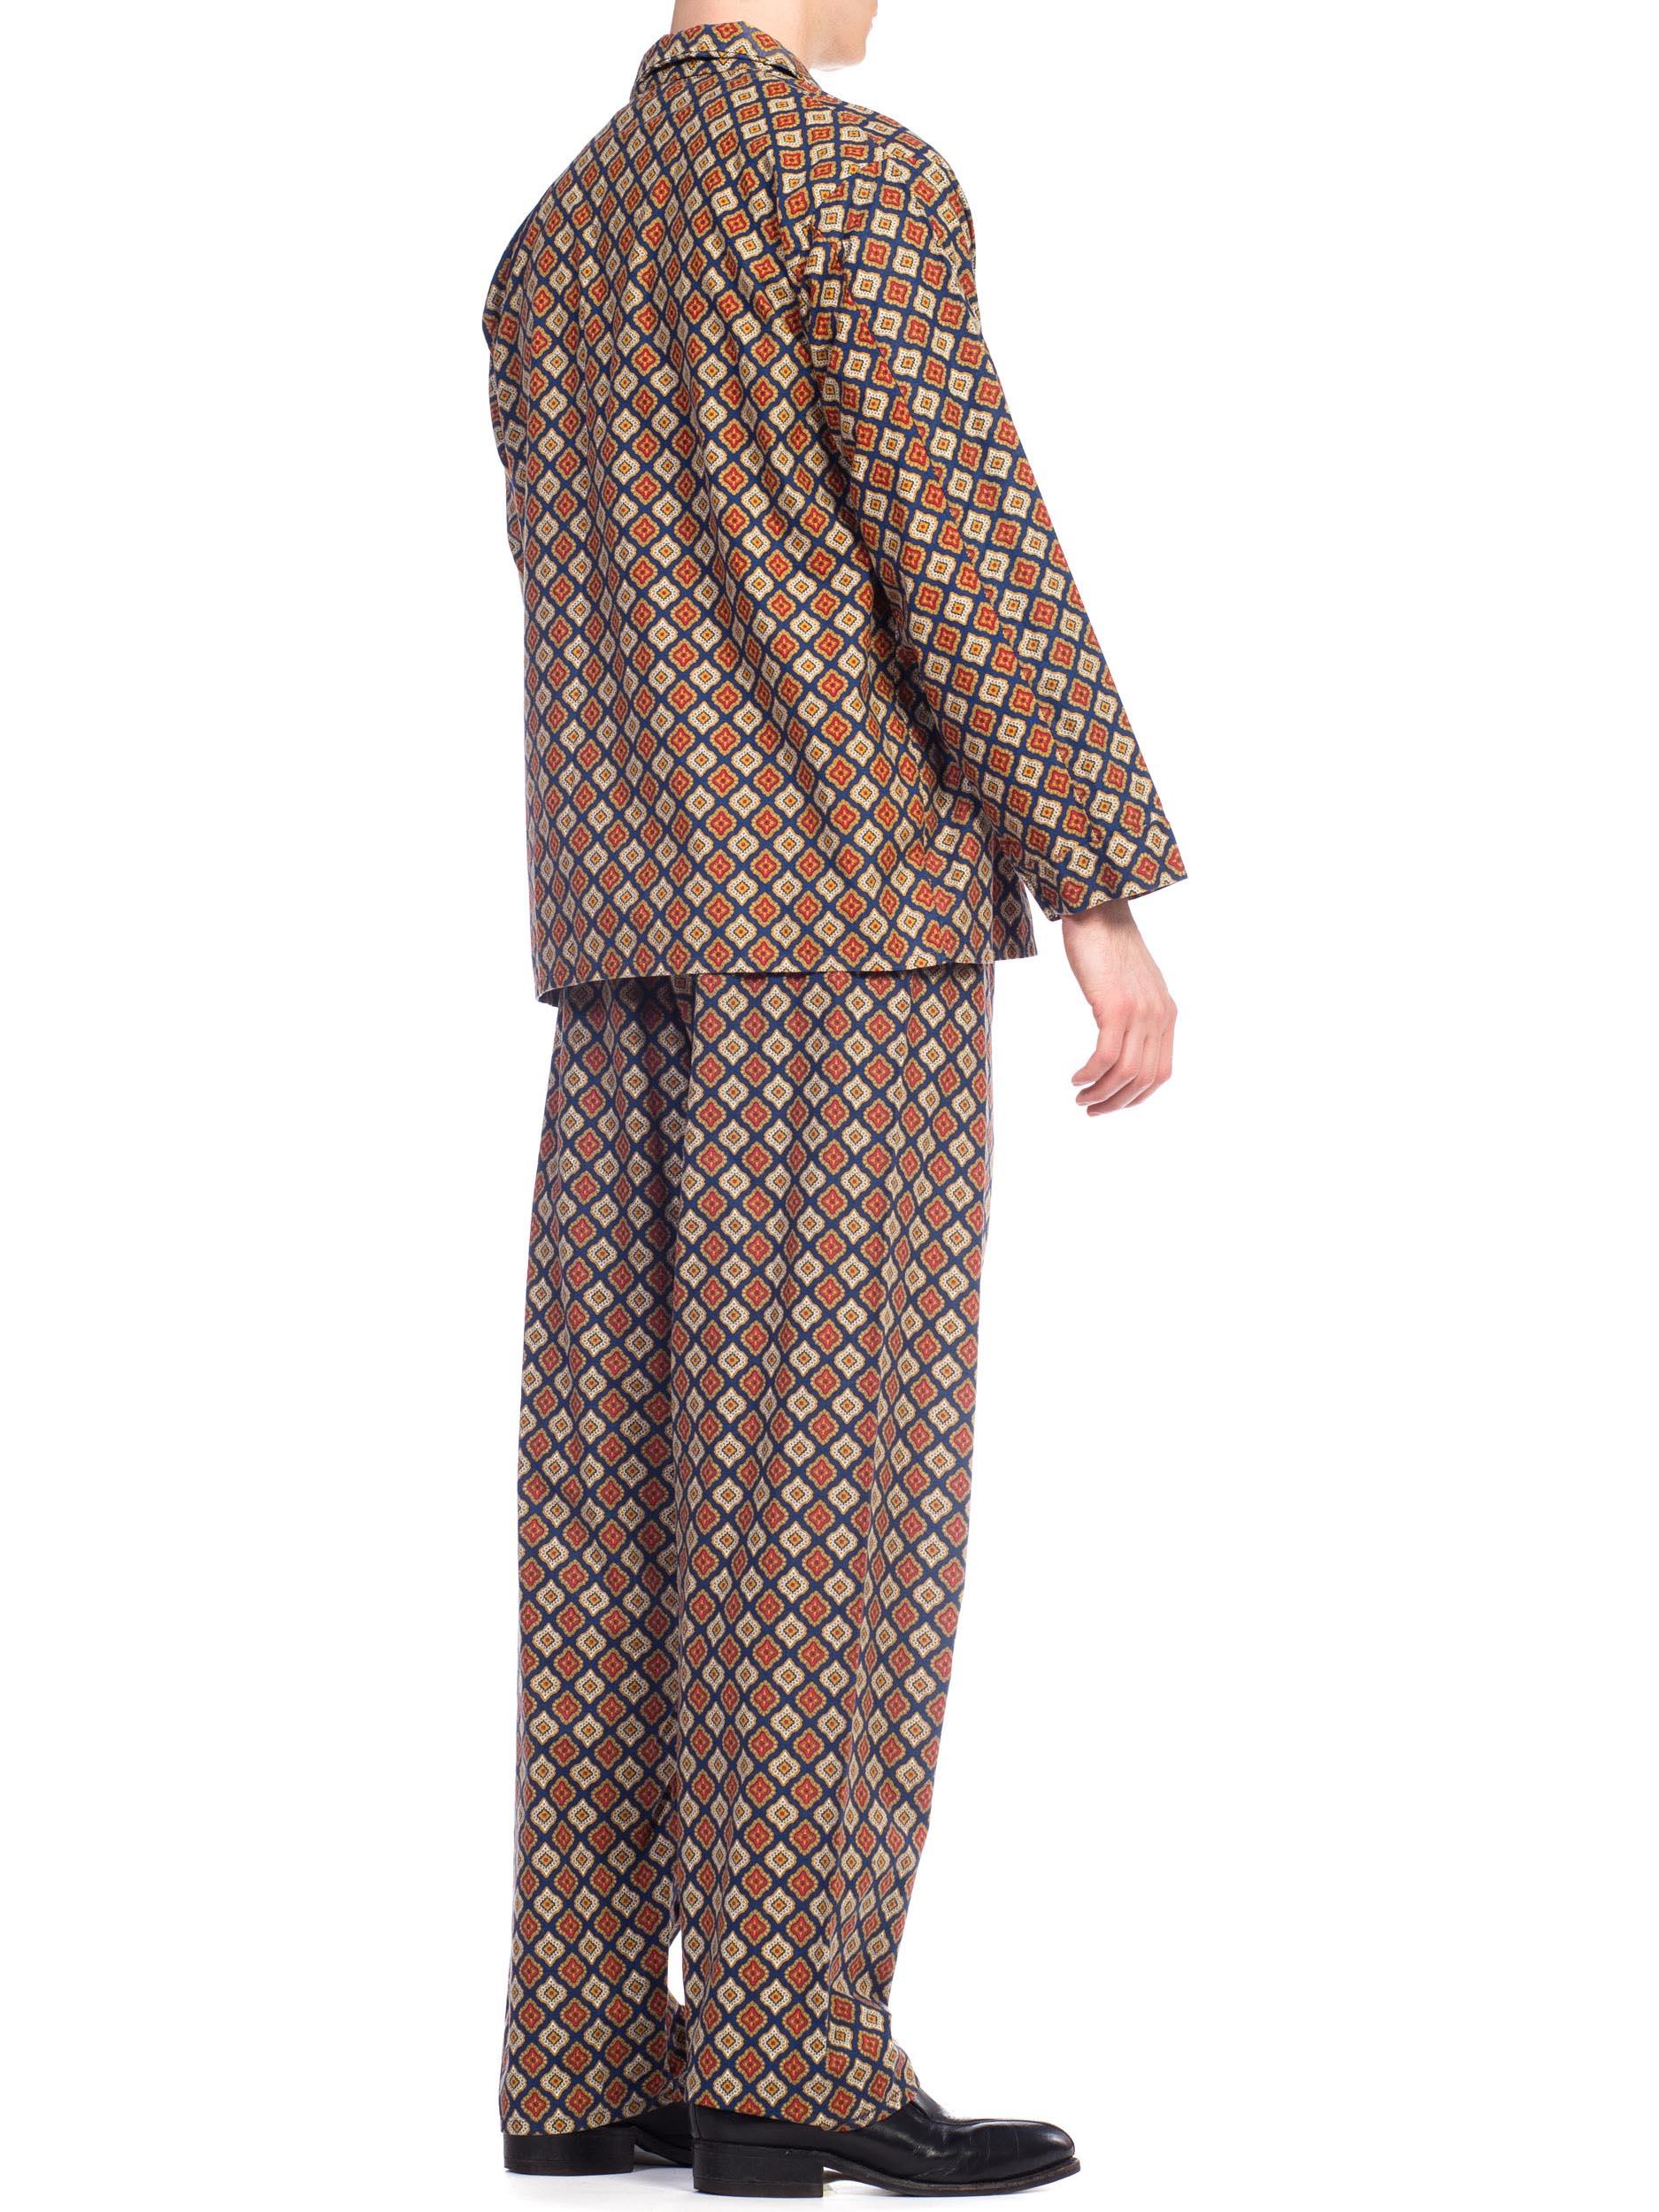 1960S Foulard Printed Cotton Men's Pajamas Set In Excellent Condition For Sale In New York, NY